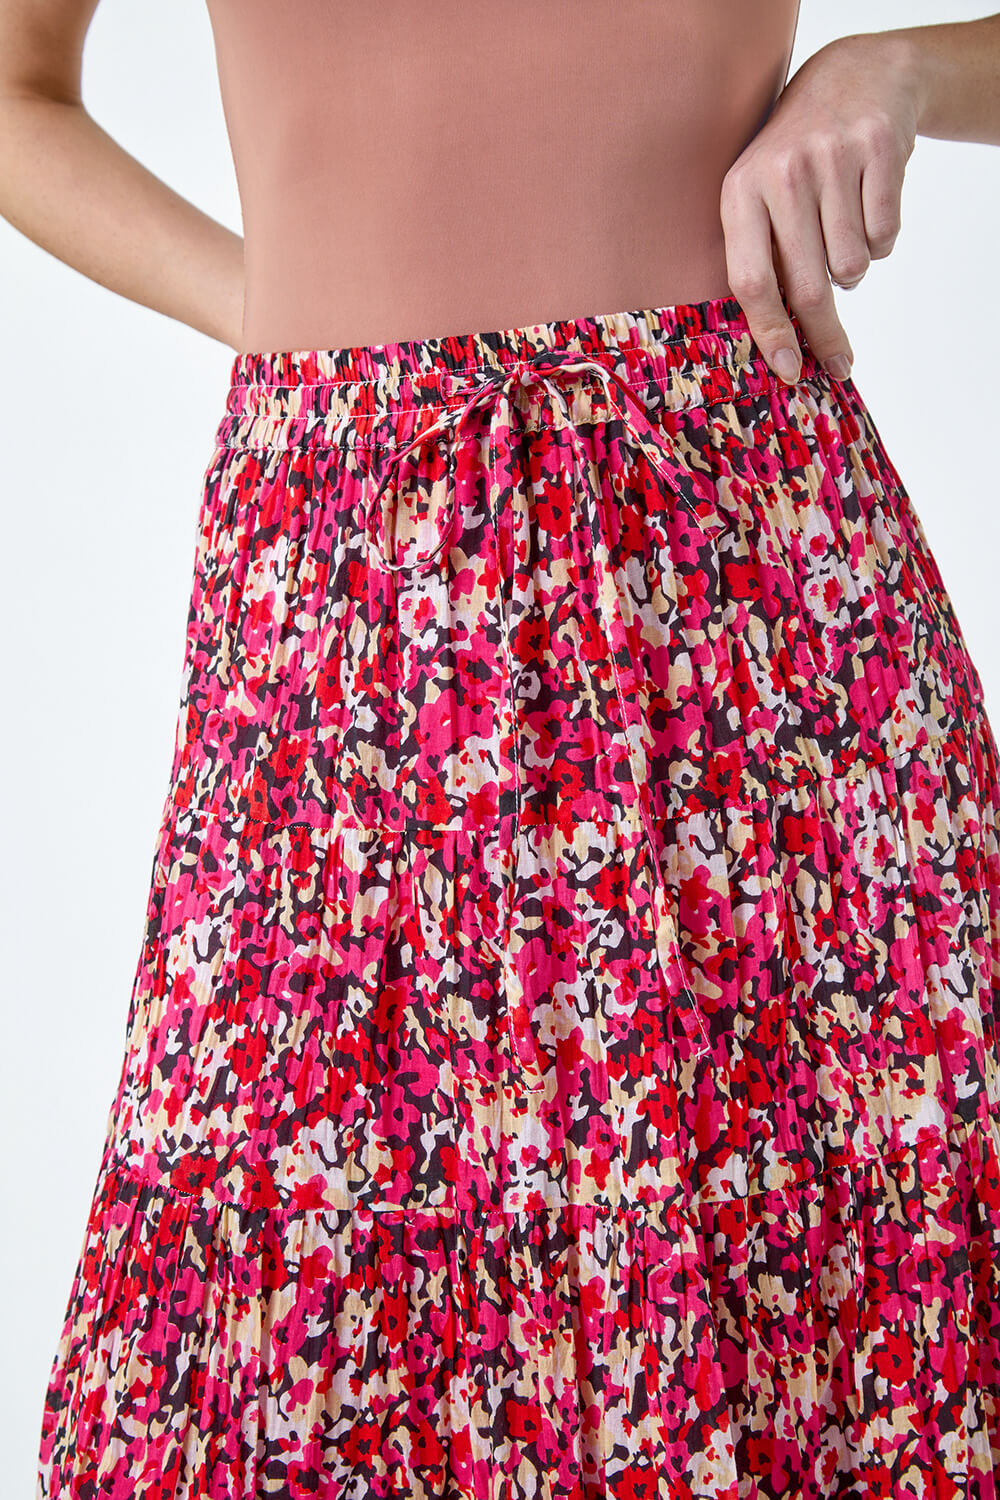 PINK Floral Crinkle Cotton A line Tiered Maxi Skirt, Image 5 of 5